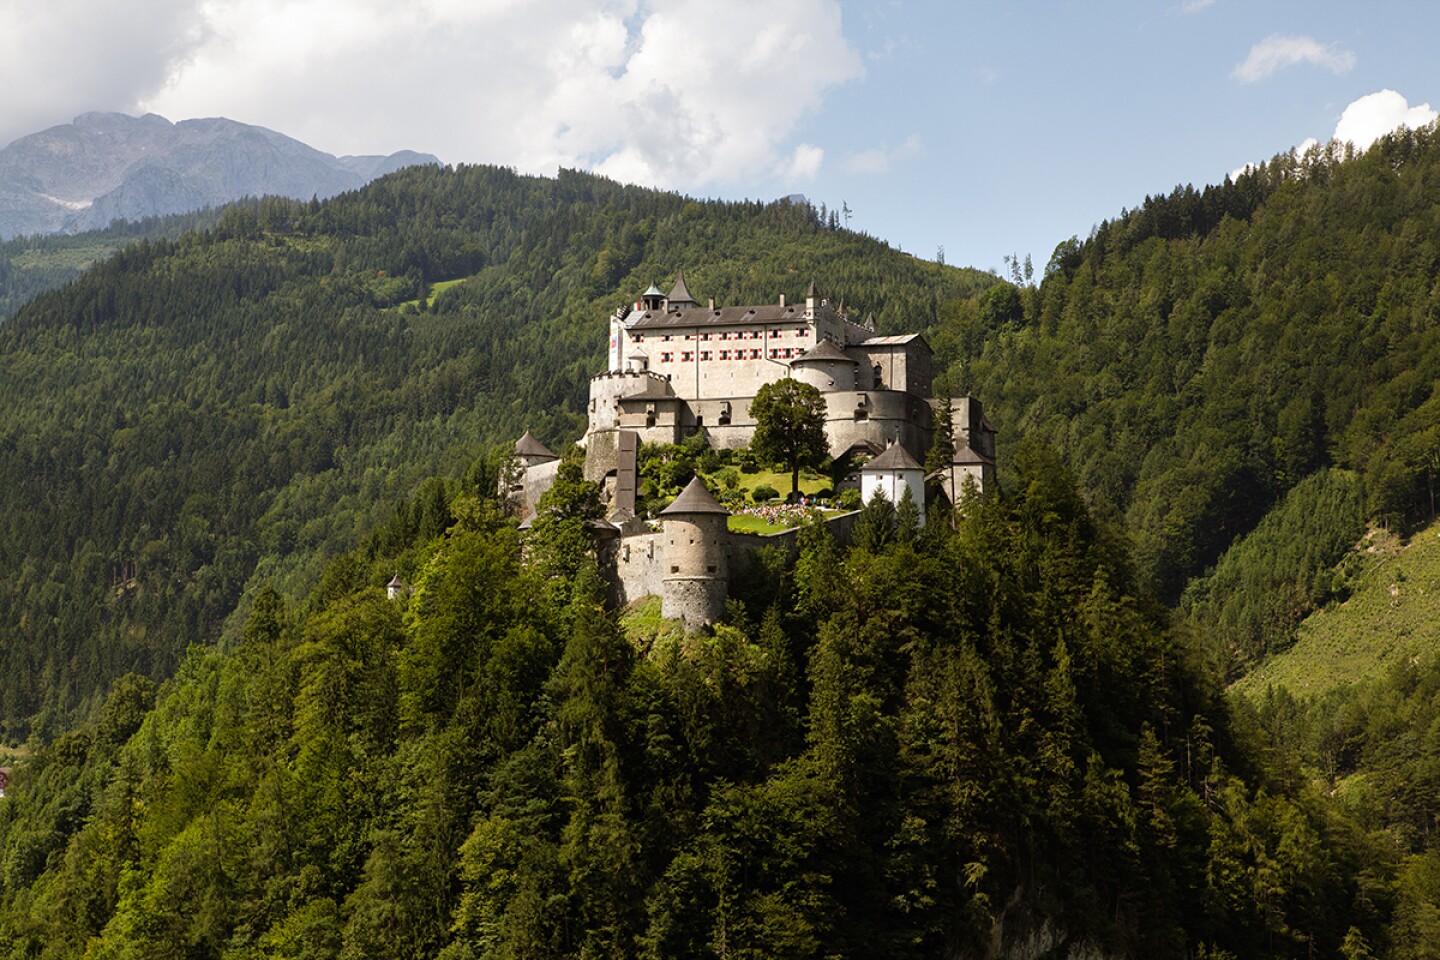 <h2>14. Burg Hohenwerfen (Hohenwerfen Castle)</h2> <p><i>Werfen, Austria</i></p> <p> A popular day trip from nearby <a class="Link" href="https://www.afar.com/travel-guides/austria/salzburg/guide" rel="noopener">Salzburg</a>, the 11th-century stone fortress of <a class="Link" href="https://www.salzburg-burgen.at/en/hohenwerfen-castle/" rel="noopener">Burg Hohenwerfen</a> ticks all the boxes when it comes to medieval grandeur. There’s the dramatic setting, 500 feet up on a rocky perch (a funicular will save you the climb) overlooking the Salzach Valley and surrounded by towering peaks of the Tennen mountain range. The castle, dating from 1077 (though it’s seen additions throughout the centuries), also looks the part, with multiple towers, magnificent wood-beamed state rooms, a grand frescoed knights’ hall, a hidden stone staircase, an arsenal, a dungeon, and even a torture chamber. Self-guided audio tours are available, and there’s one tailored to kids. The castle is also home to the State Falconry Center, with daily demonstrations of Indigenous birds of prey.<br> </p> <h3>How to visit Burg Hohenwerfen</h3> <p>The castle is open from April to November. There are direct trains from Salzburg to Werfen (lasting about 45 minutes); it’s a 20-minute walk to the castle’s funicular from the station. If you are driving from Salzburg, 25 miles away, there is an on-site parking lot, although note that it’s about a one-mile walk to the castle from there.</p> <p><i>This article was originally published in 2019 and most recently updated on October 16, 2023 with current information.</i></p>